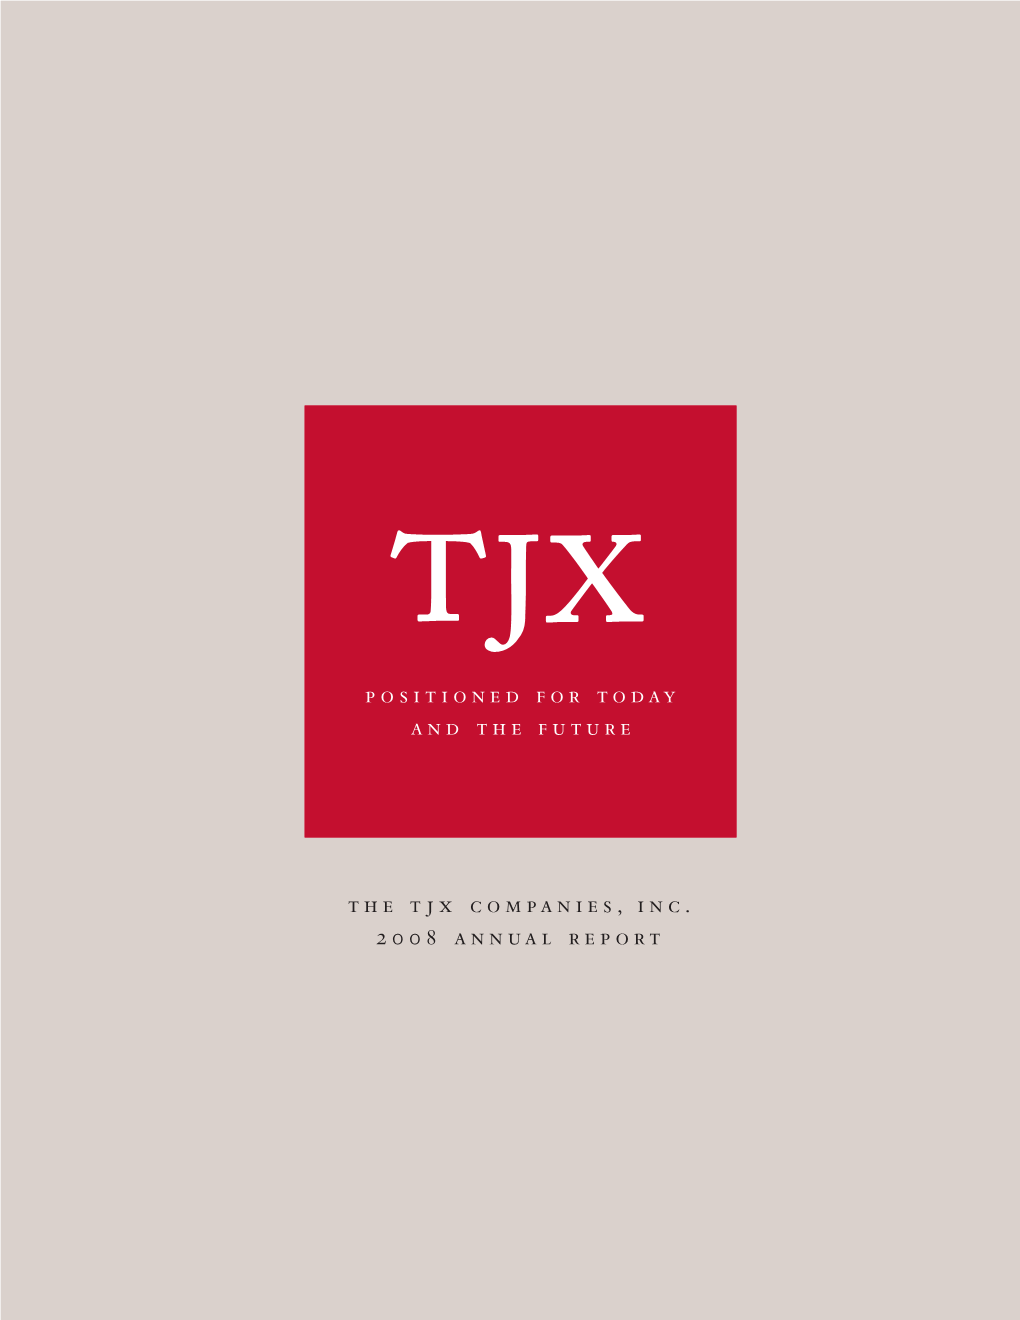 The Tjx Companies, Inc. 2008 Annual Report Positioned for Today and the Future